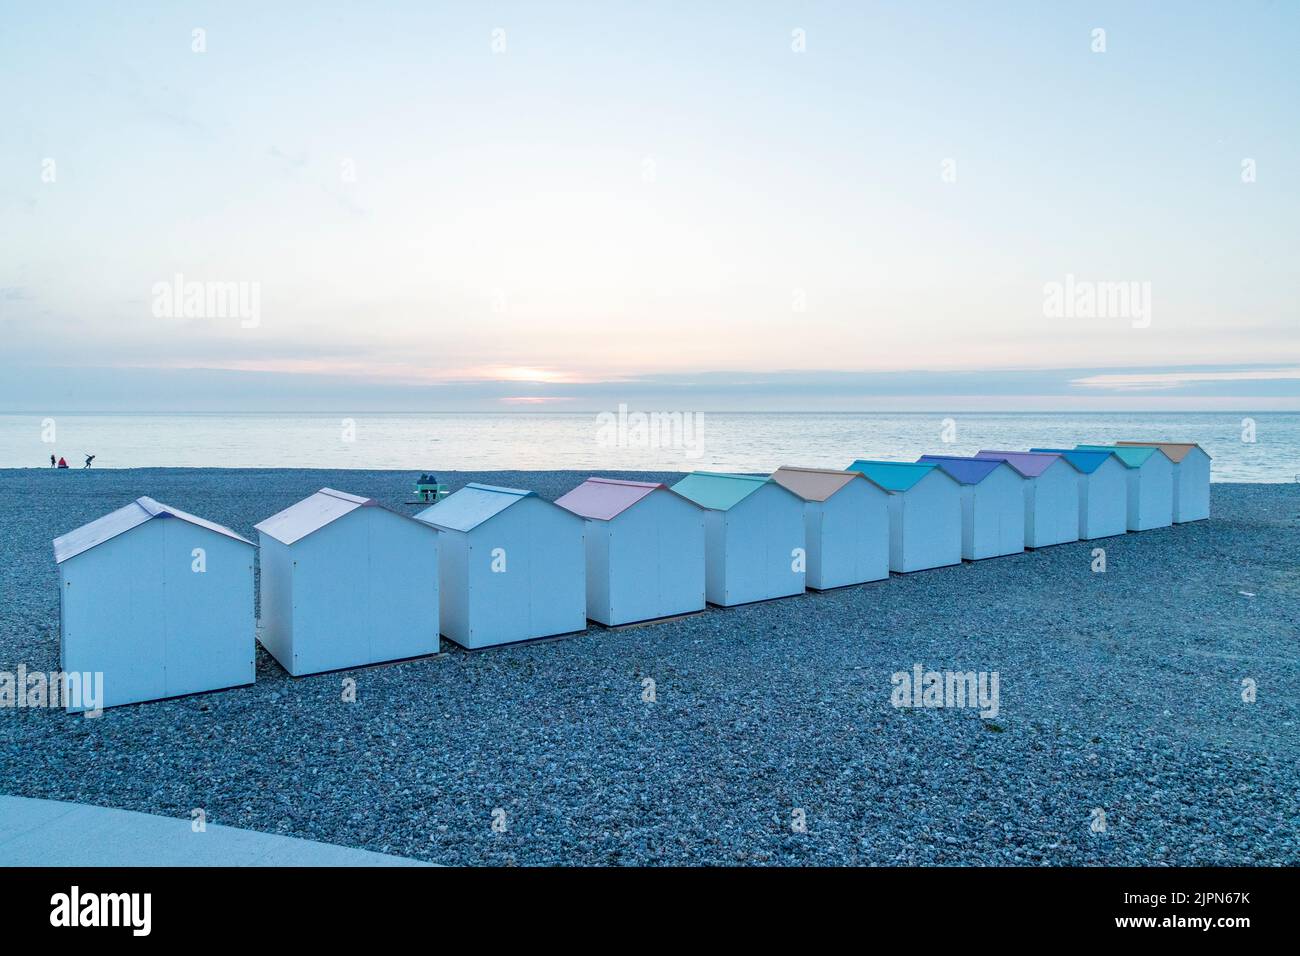 France, Seine Maritime, Cote d'Albatre, Le Treport, pebble beach and beach cabins in the evening // France, Seine Maritime (76), Côte d'Albatre, Le Tr Stock Photo